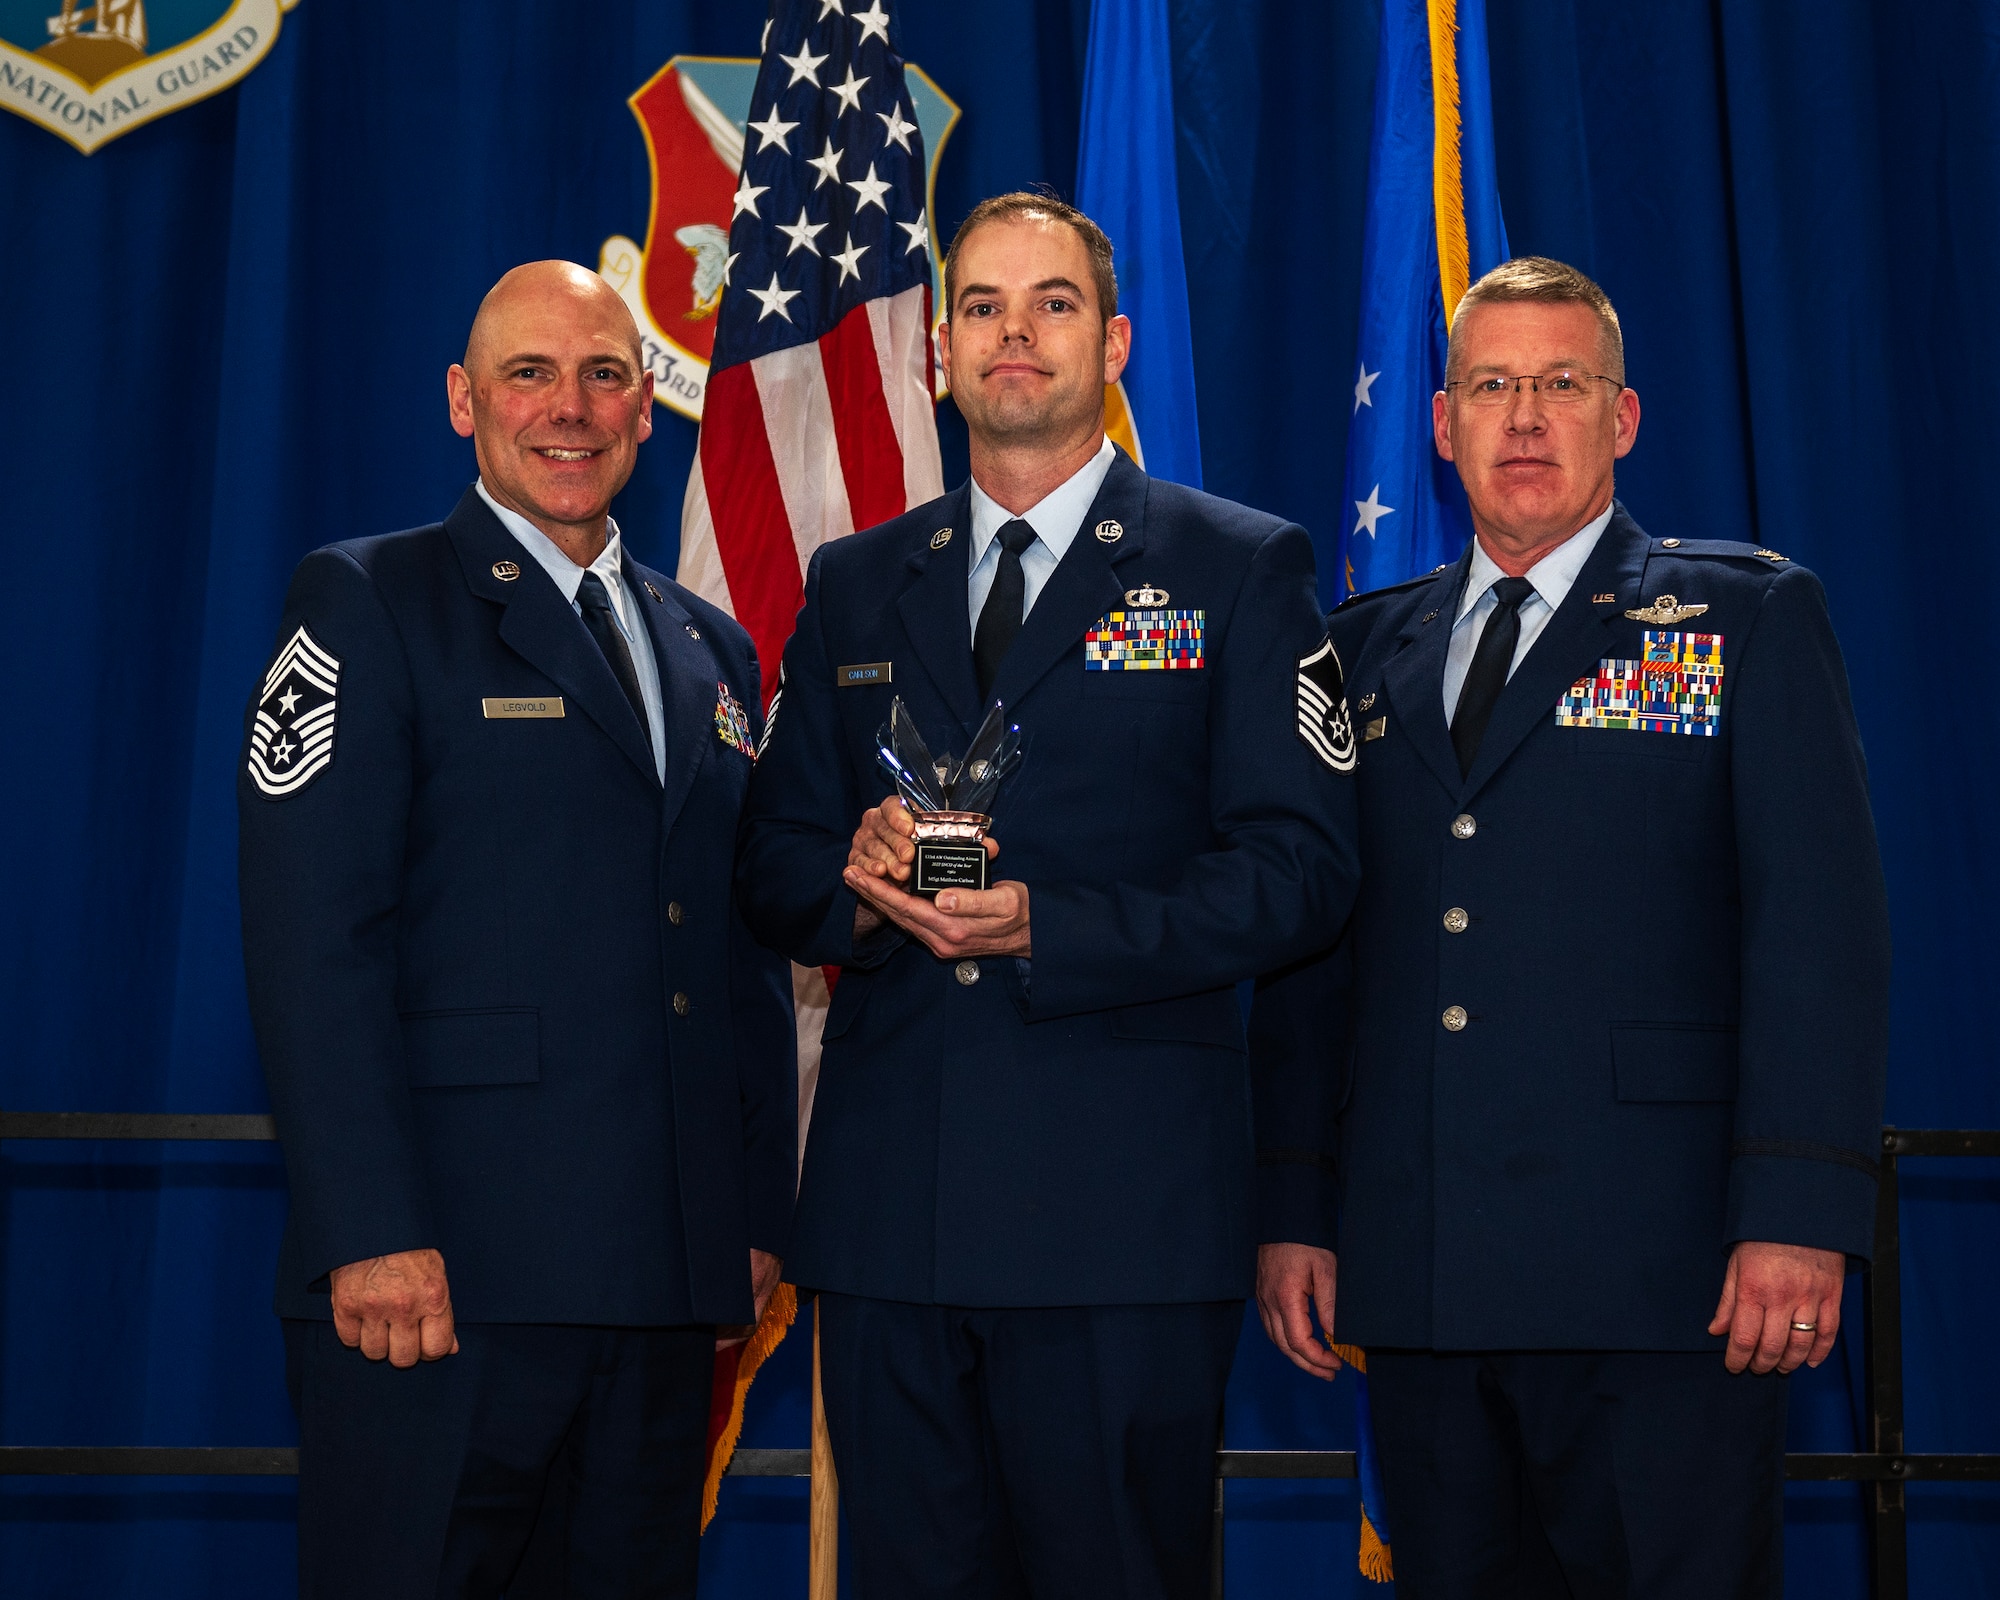 U.S. Air Force Master Sgt. Matthew Carlson, 133rd Operations Group, receives the 2022 Senior Non-Commissioned Officer of the Year award in St. Paul, Minn., Dec. 11, 2022.